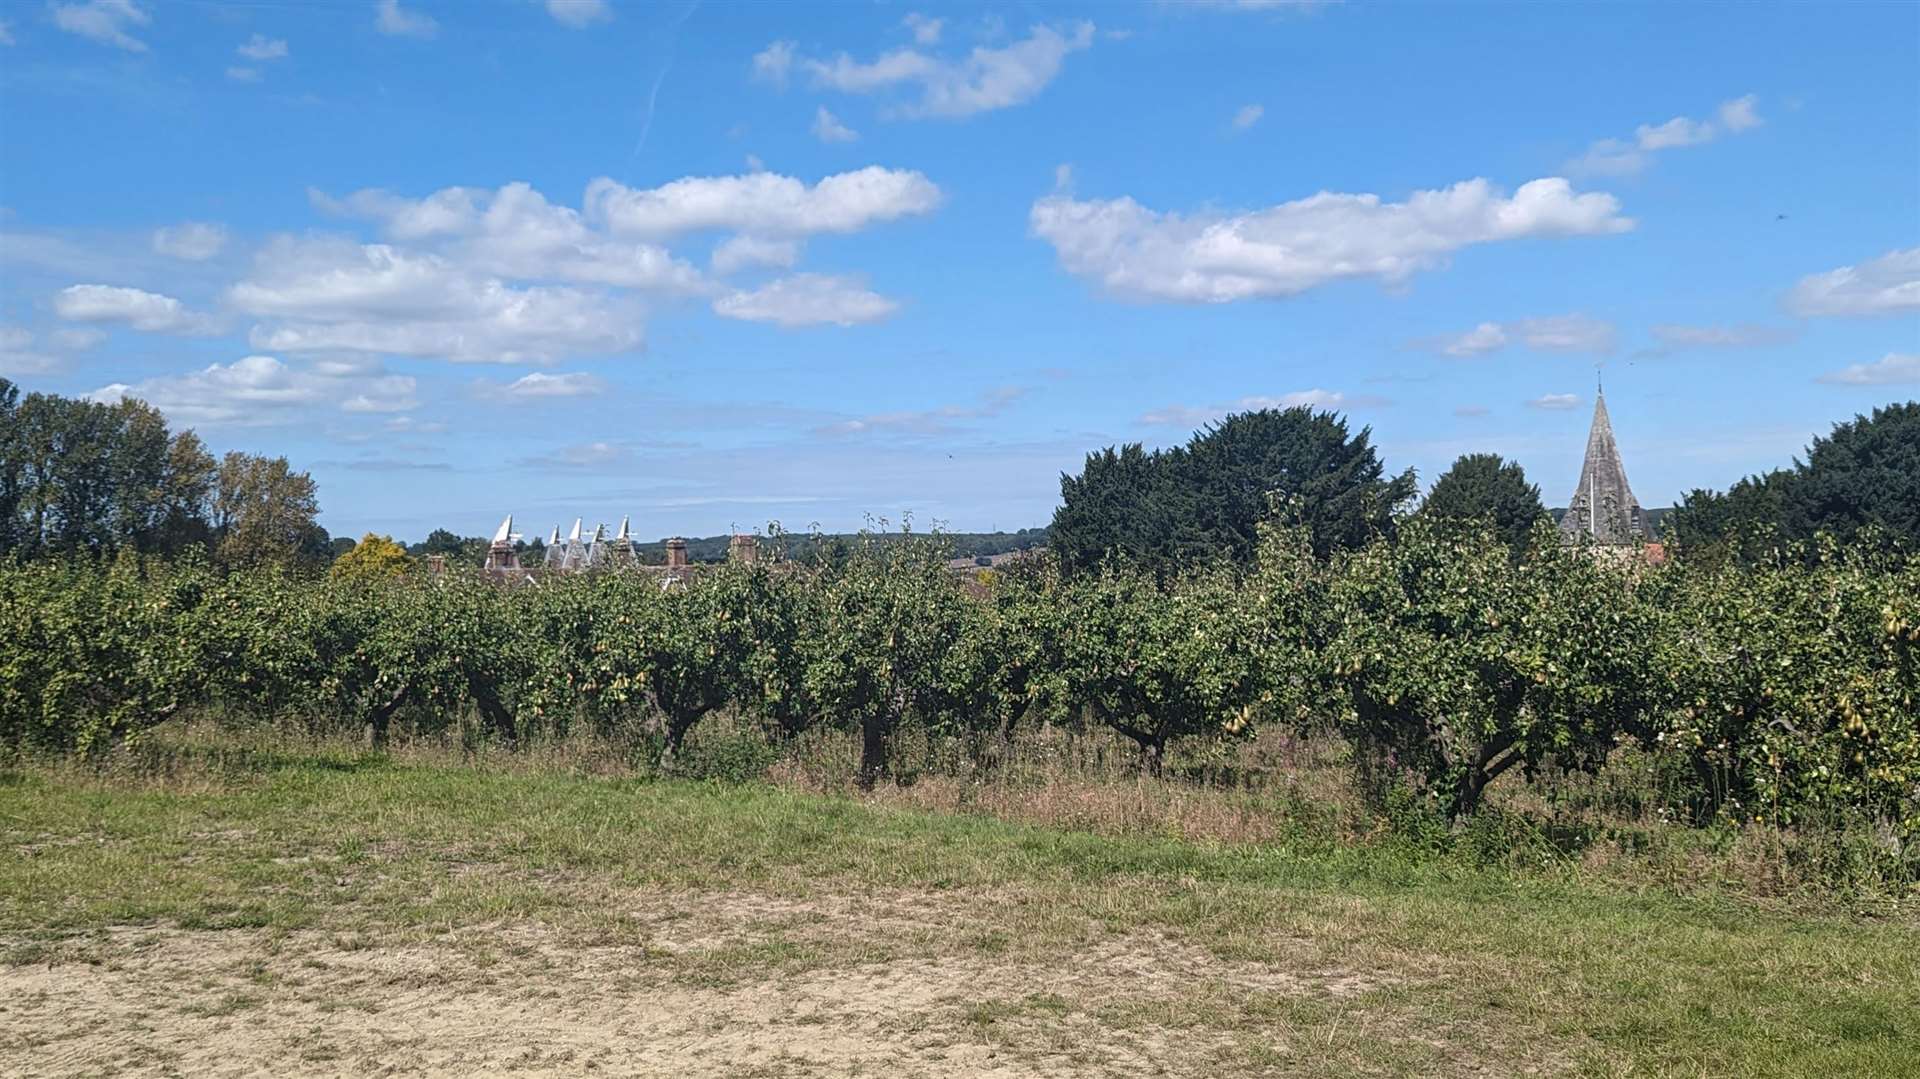 A view of oast houses and a church spire across the orchards